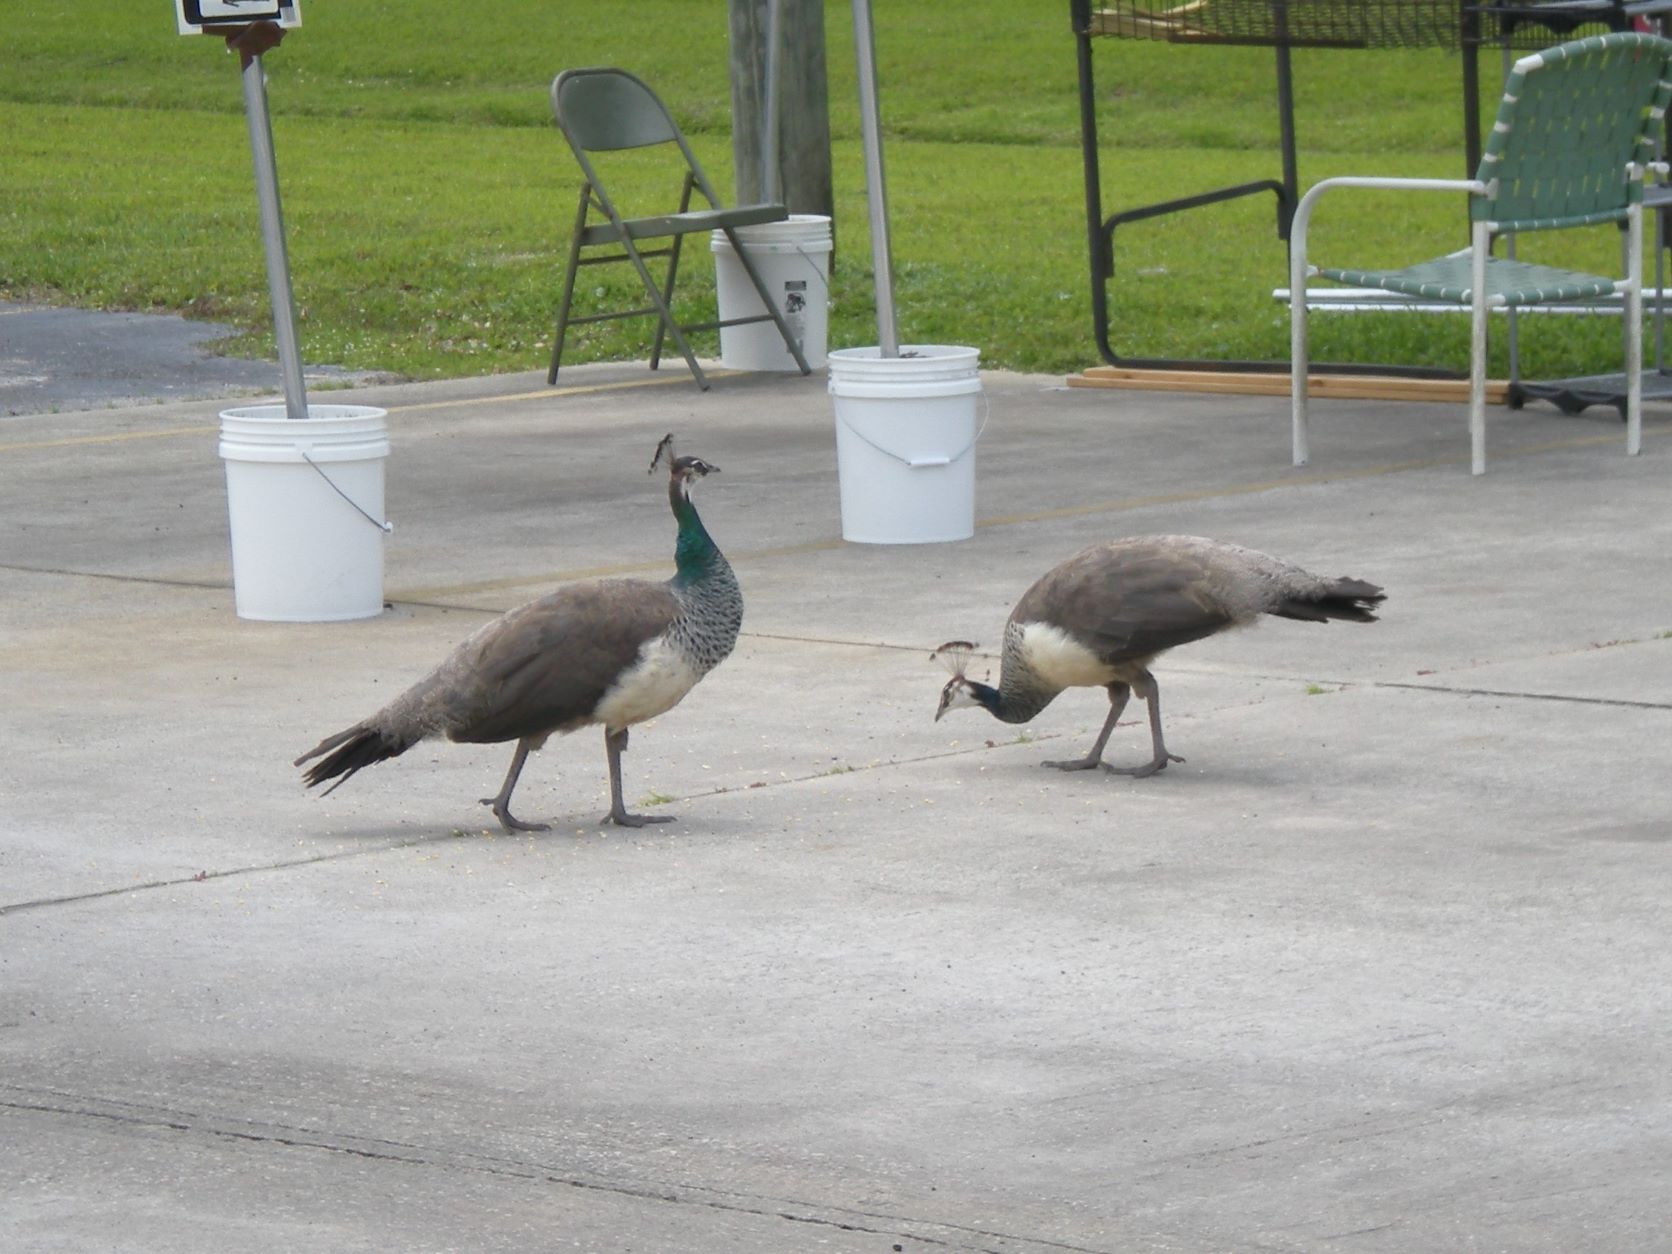 a pair of peahens walking around a parking lot